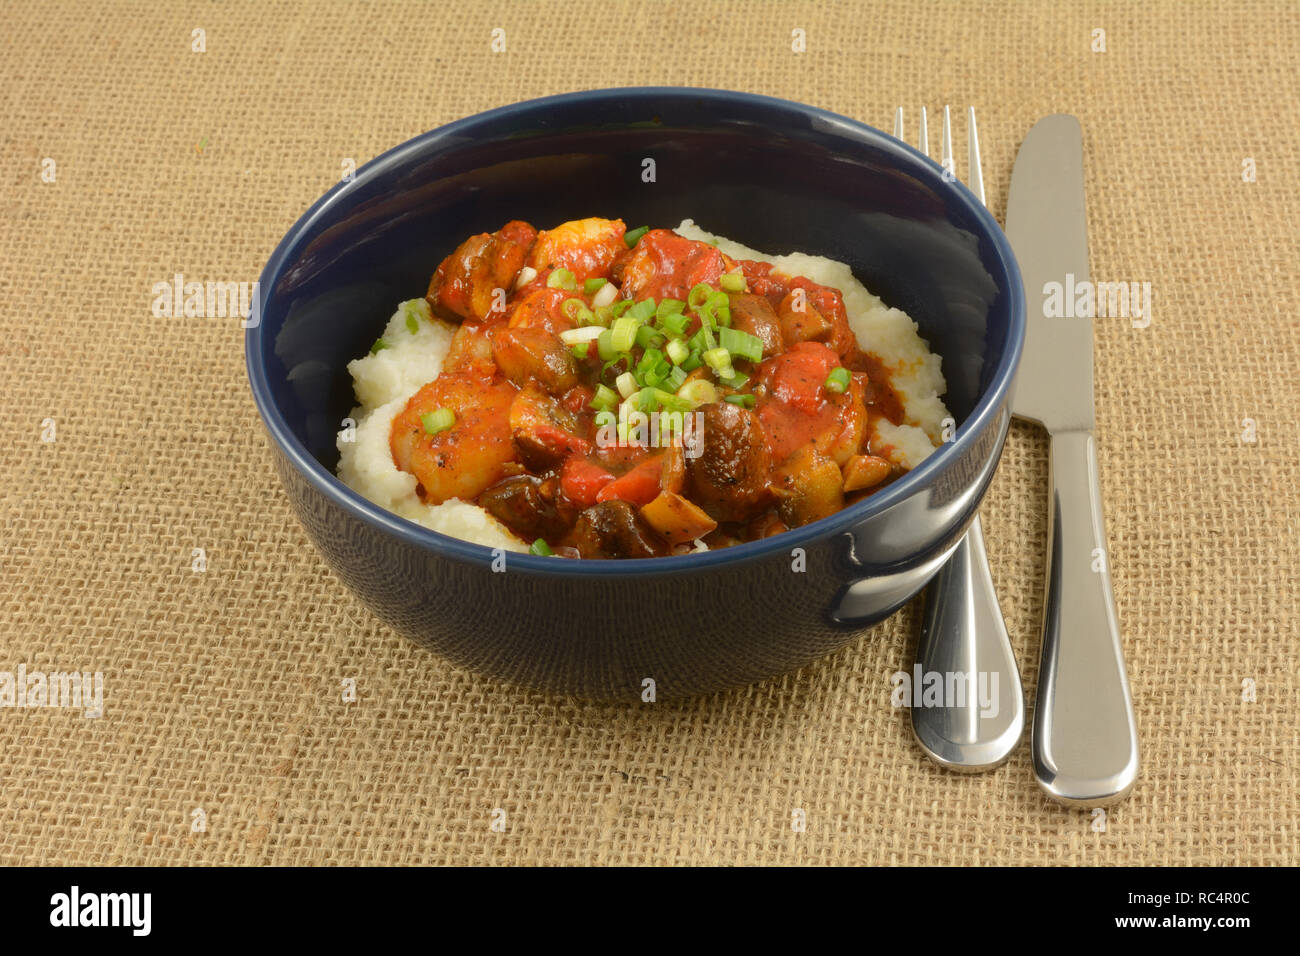 Shrimp and grits with mushrooms and red peppers in blue bowl with knife and fork on burlap Stock Photo